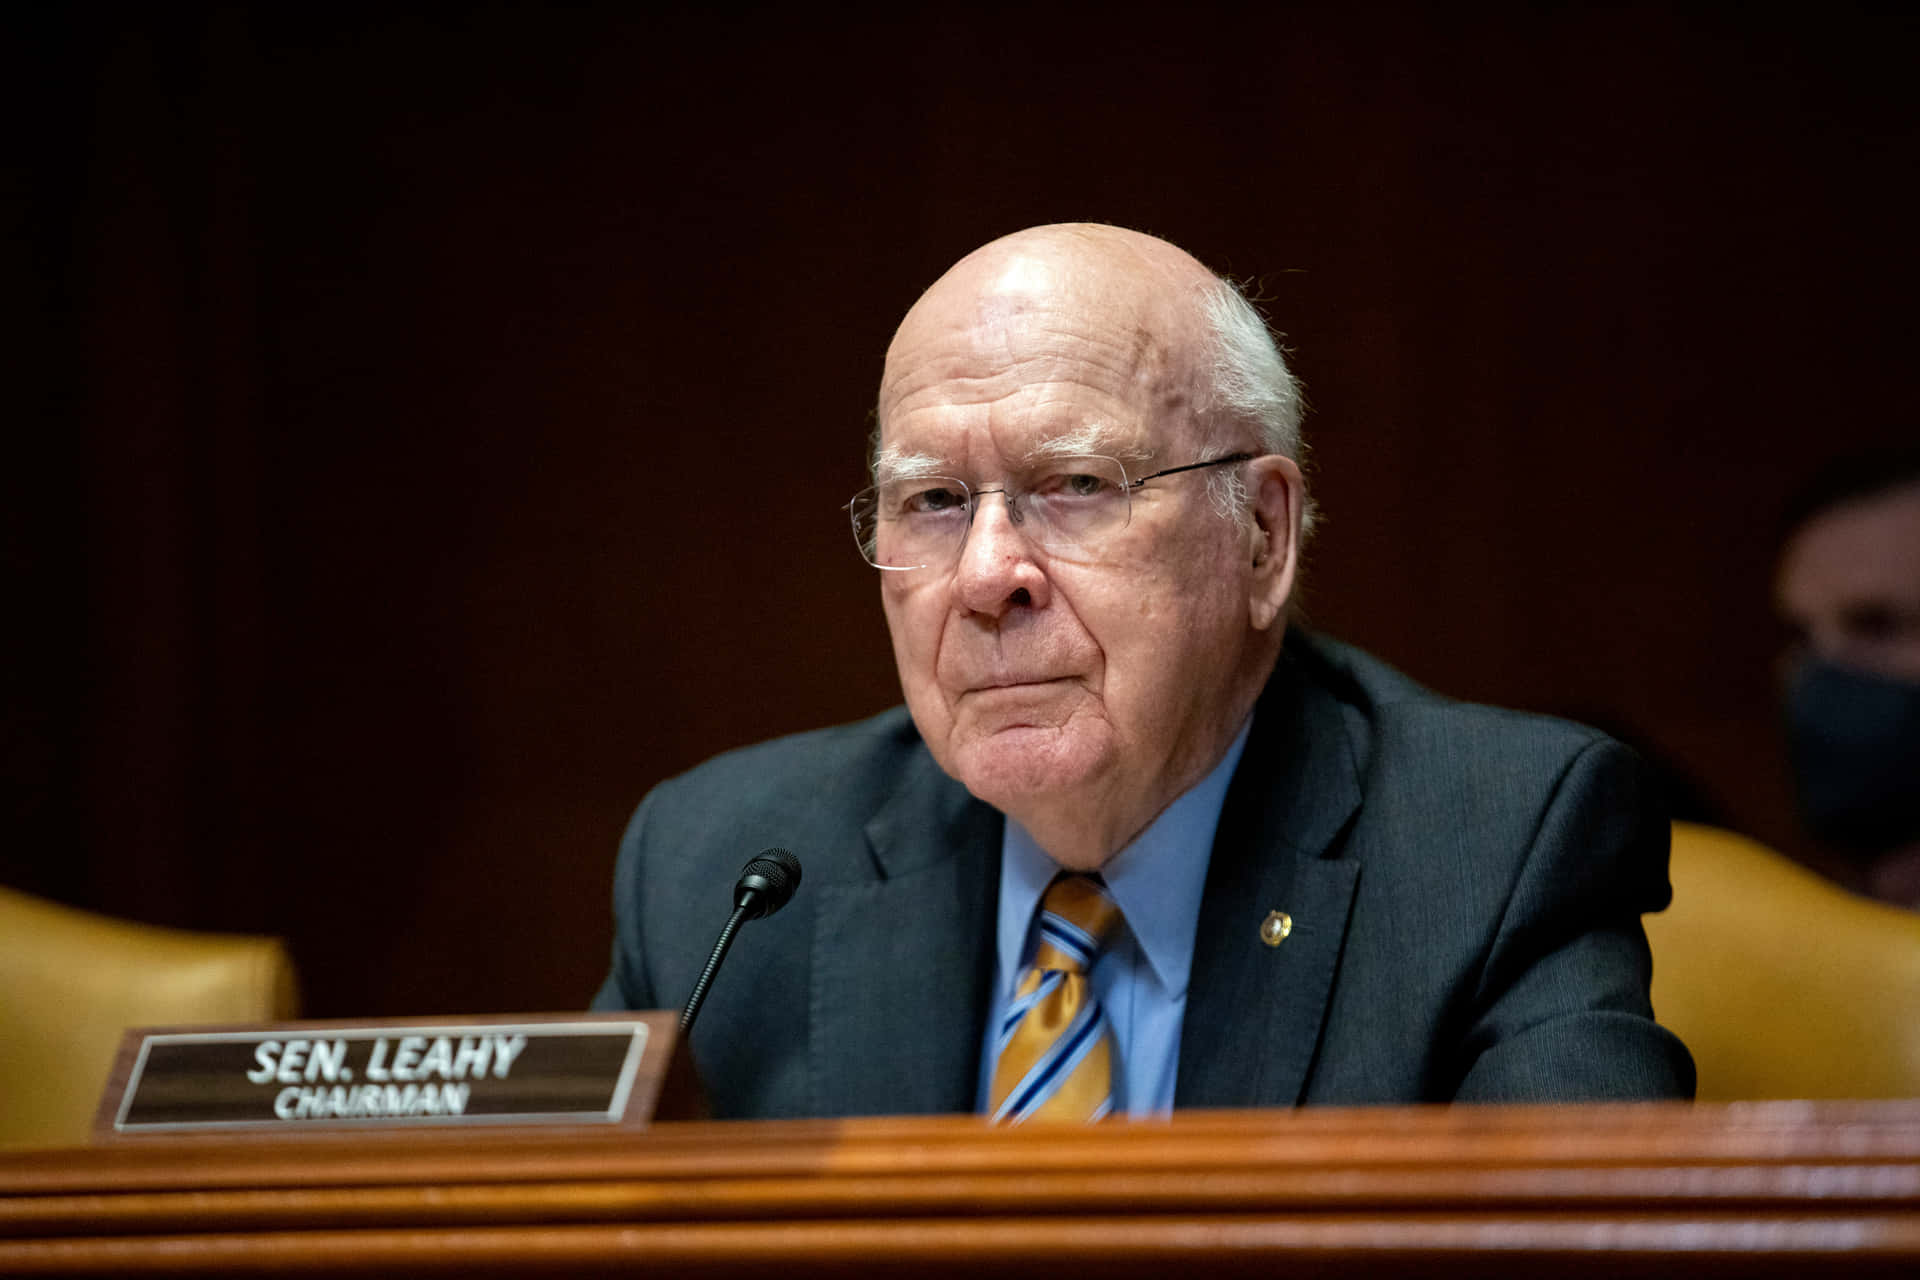 Patrick Leahy Listening Intently Wallpaper